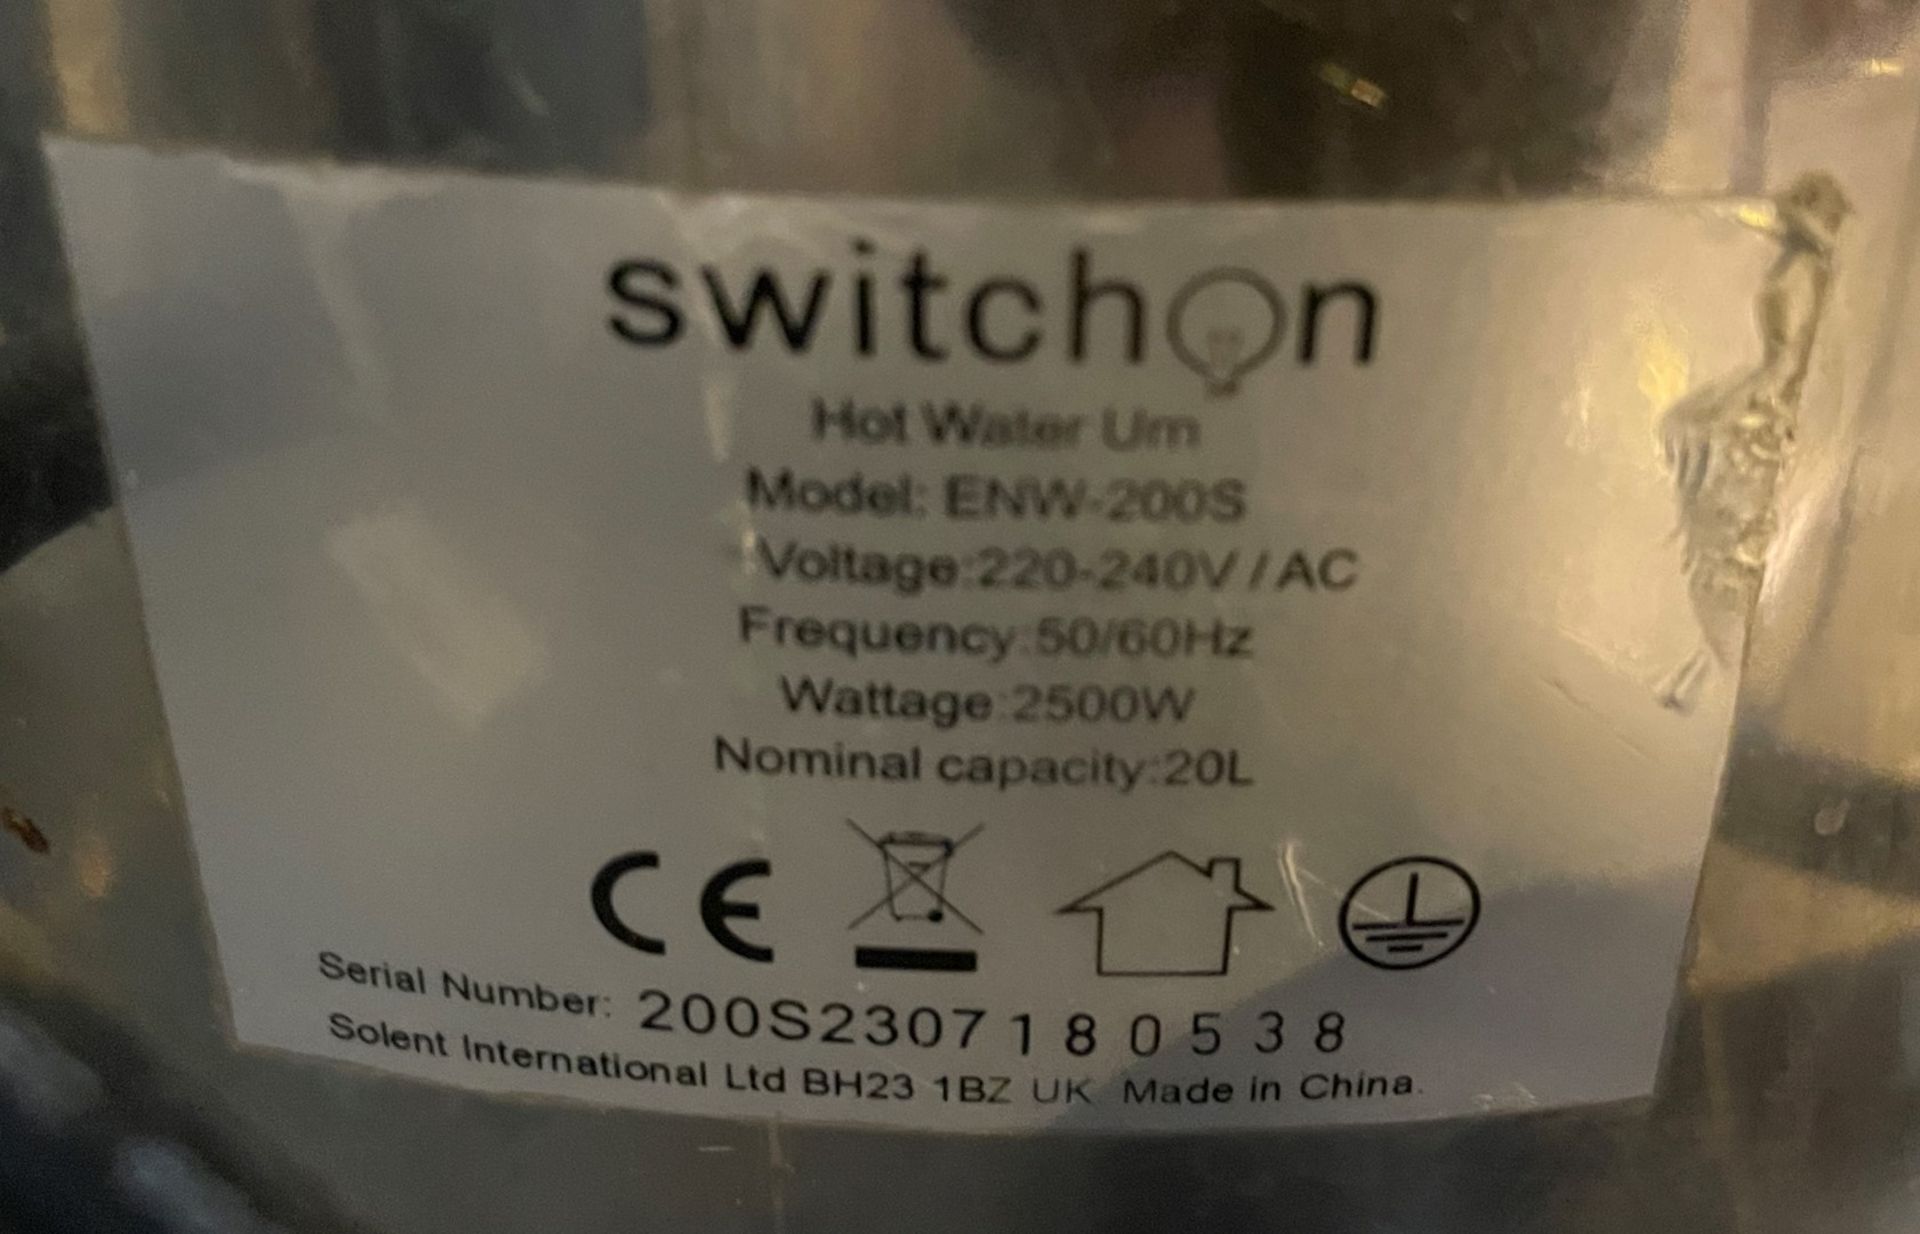 1 x Switch On Hot Water Urn - 20 Litres - 2500W - Stainless Steel Finish - Model ENW-200S - Image 6 of 6